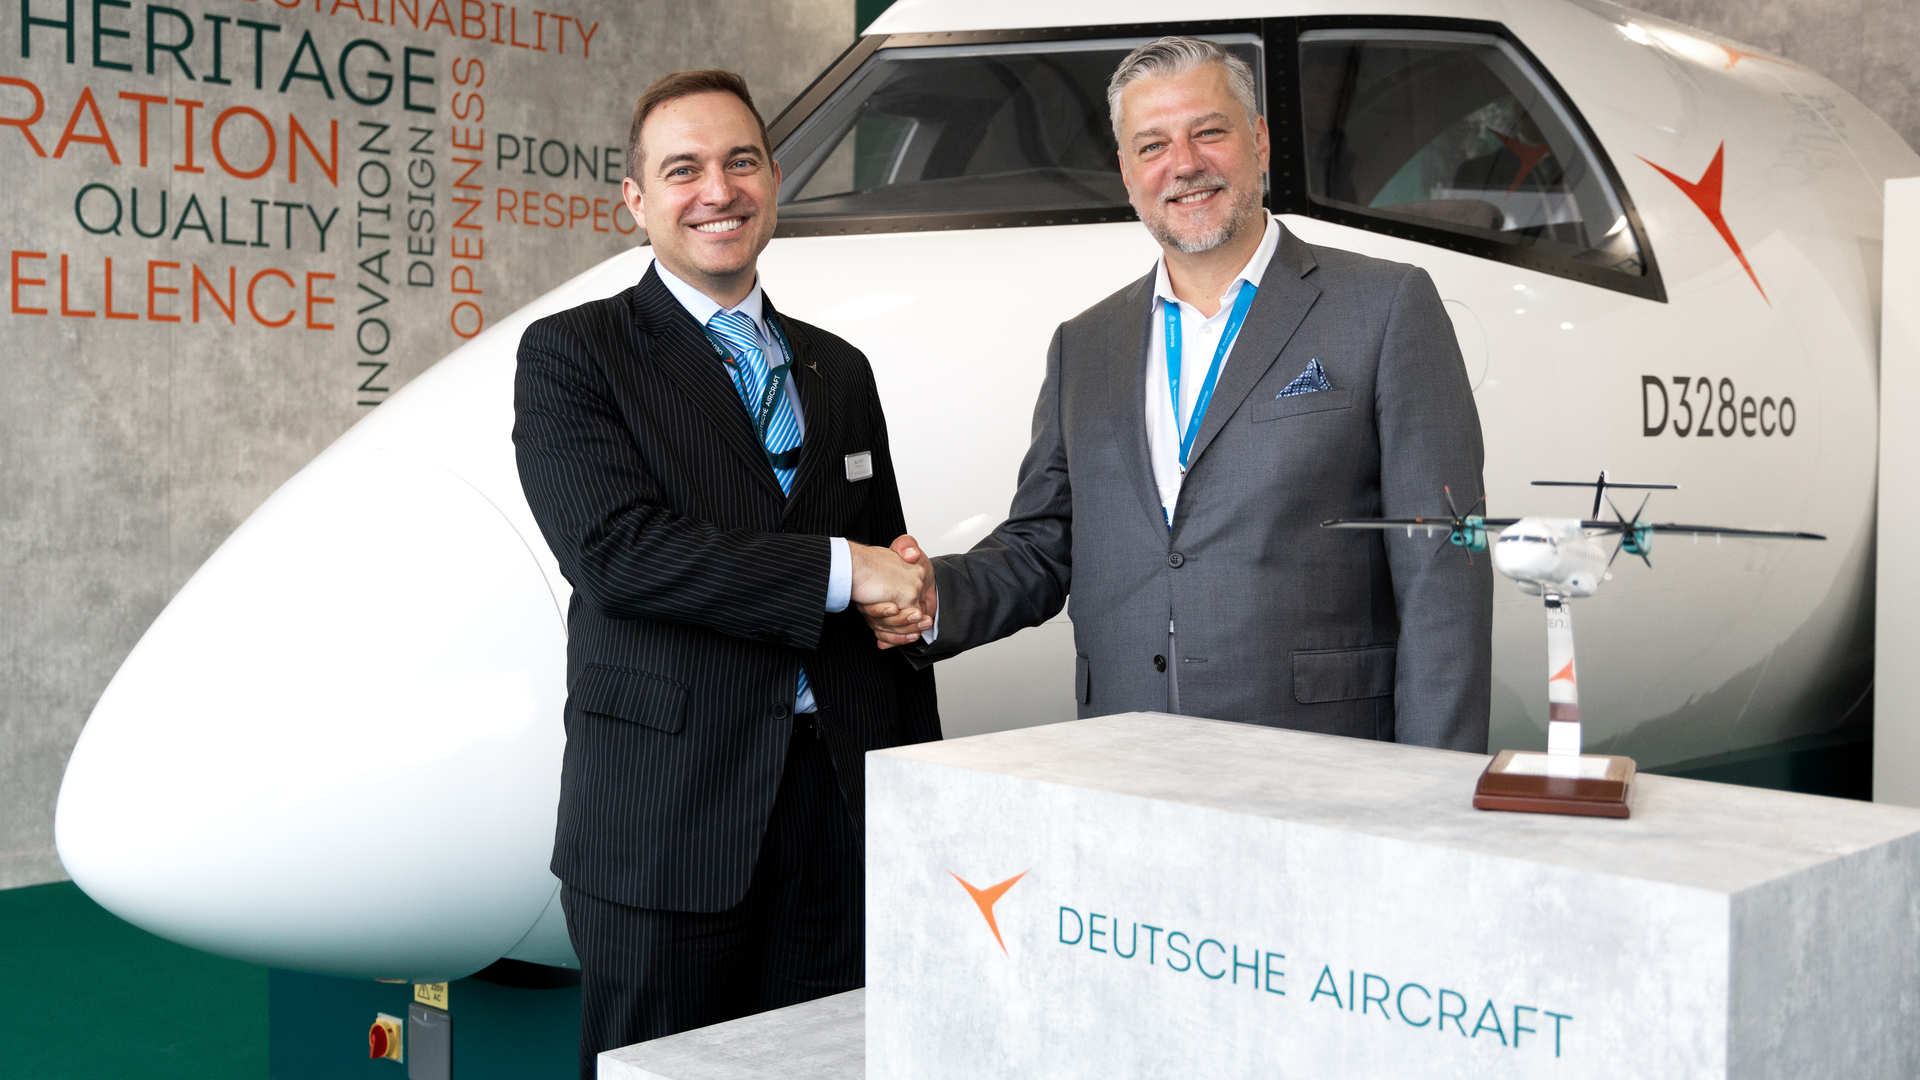 PAS 2023: Deutsche Aircraft and thyssenkrupp Aerospace form agreement on D328eco end-to-end supply chain solution